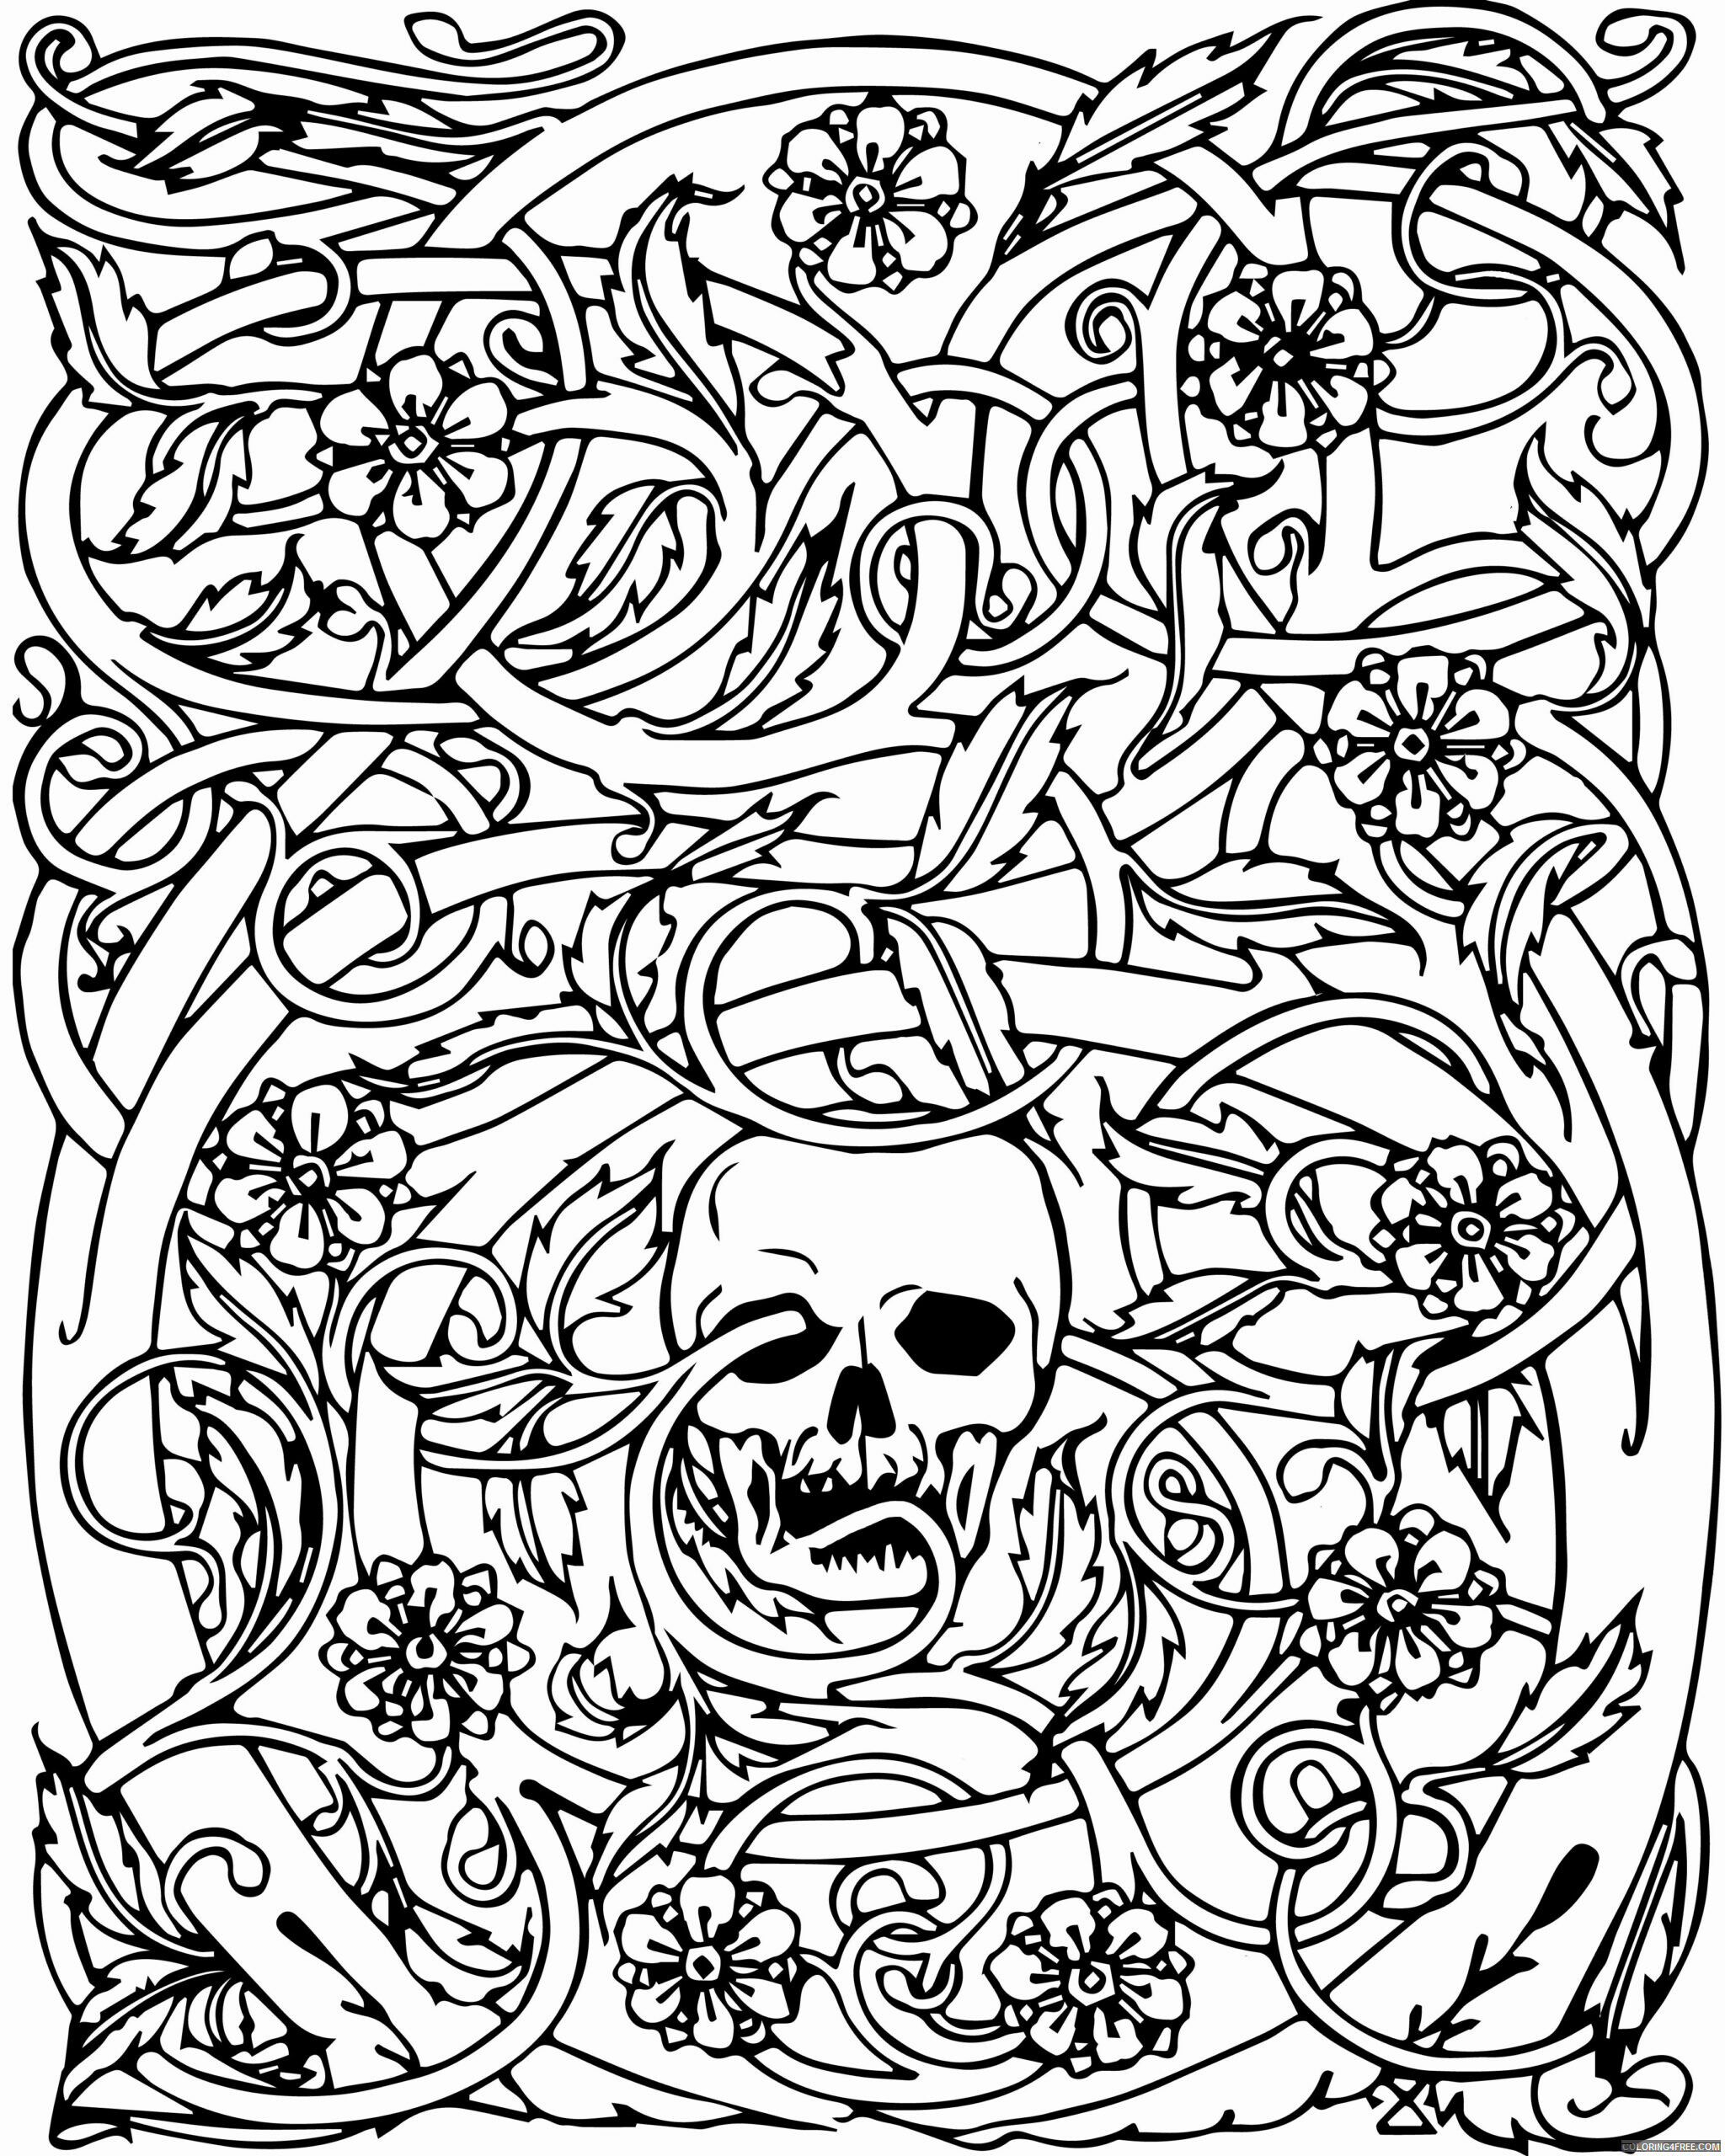 Adult Coloring Pages To Print Printable Sheets for adults free 2021 a 2150 Coloring4free